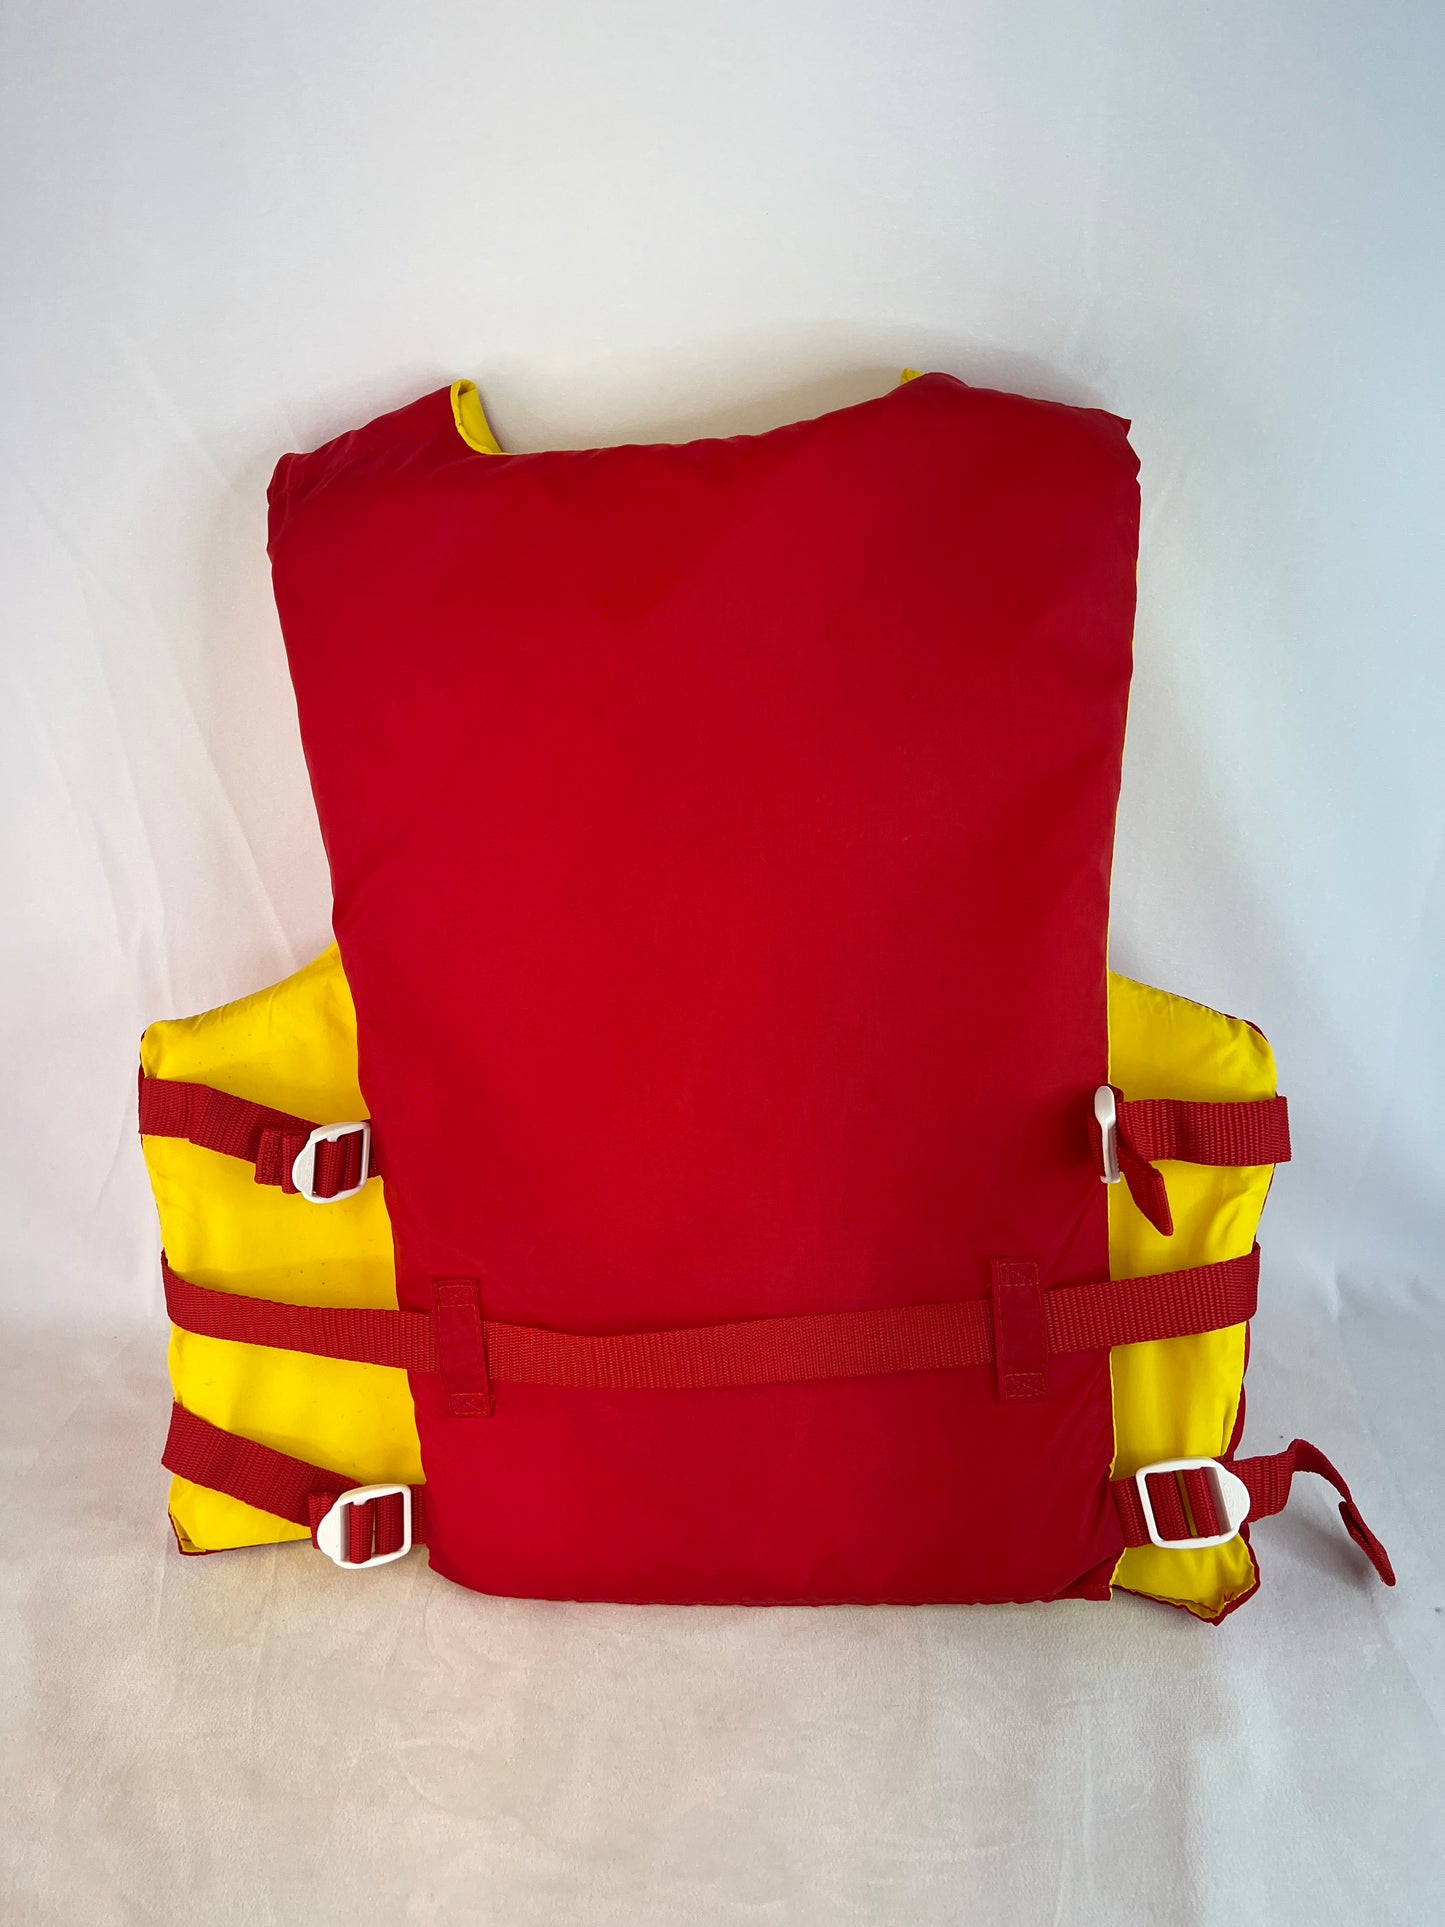 Life Jacket Adult Size Small - Medium Bu0y o Boy Red Yellow Excellent